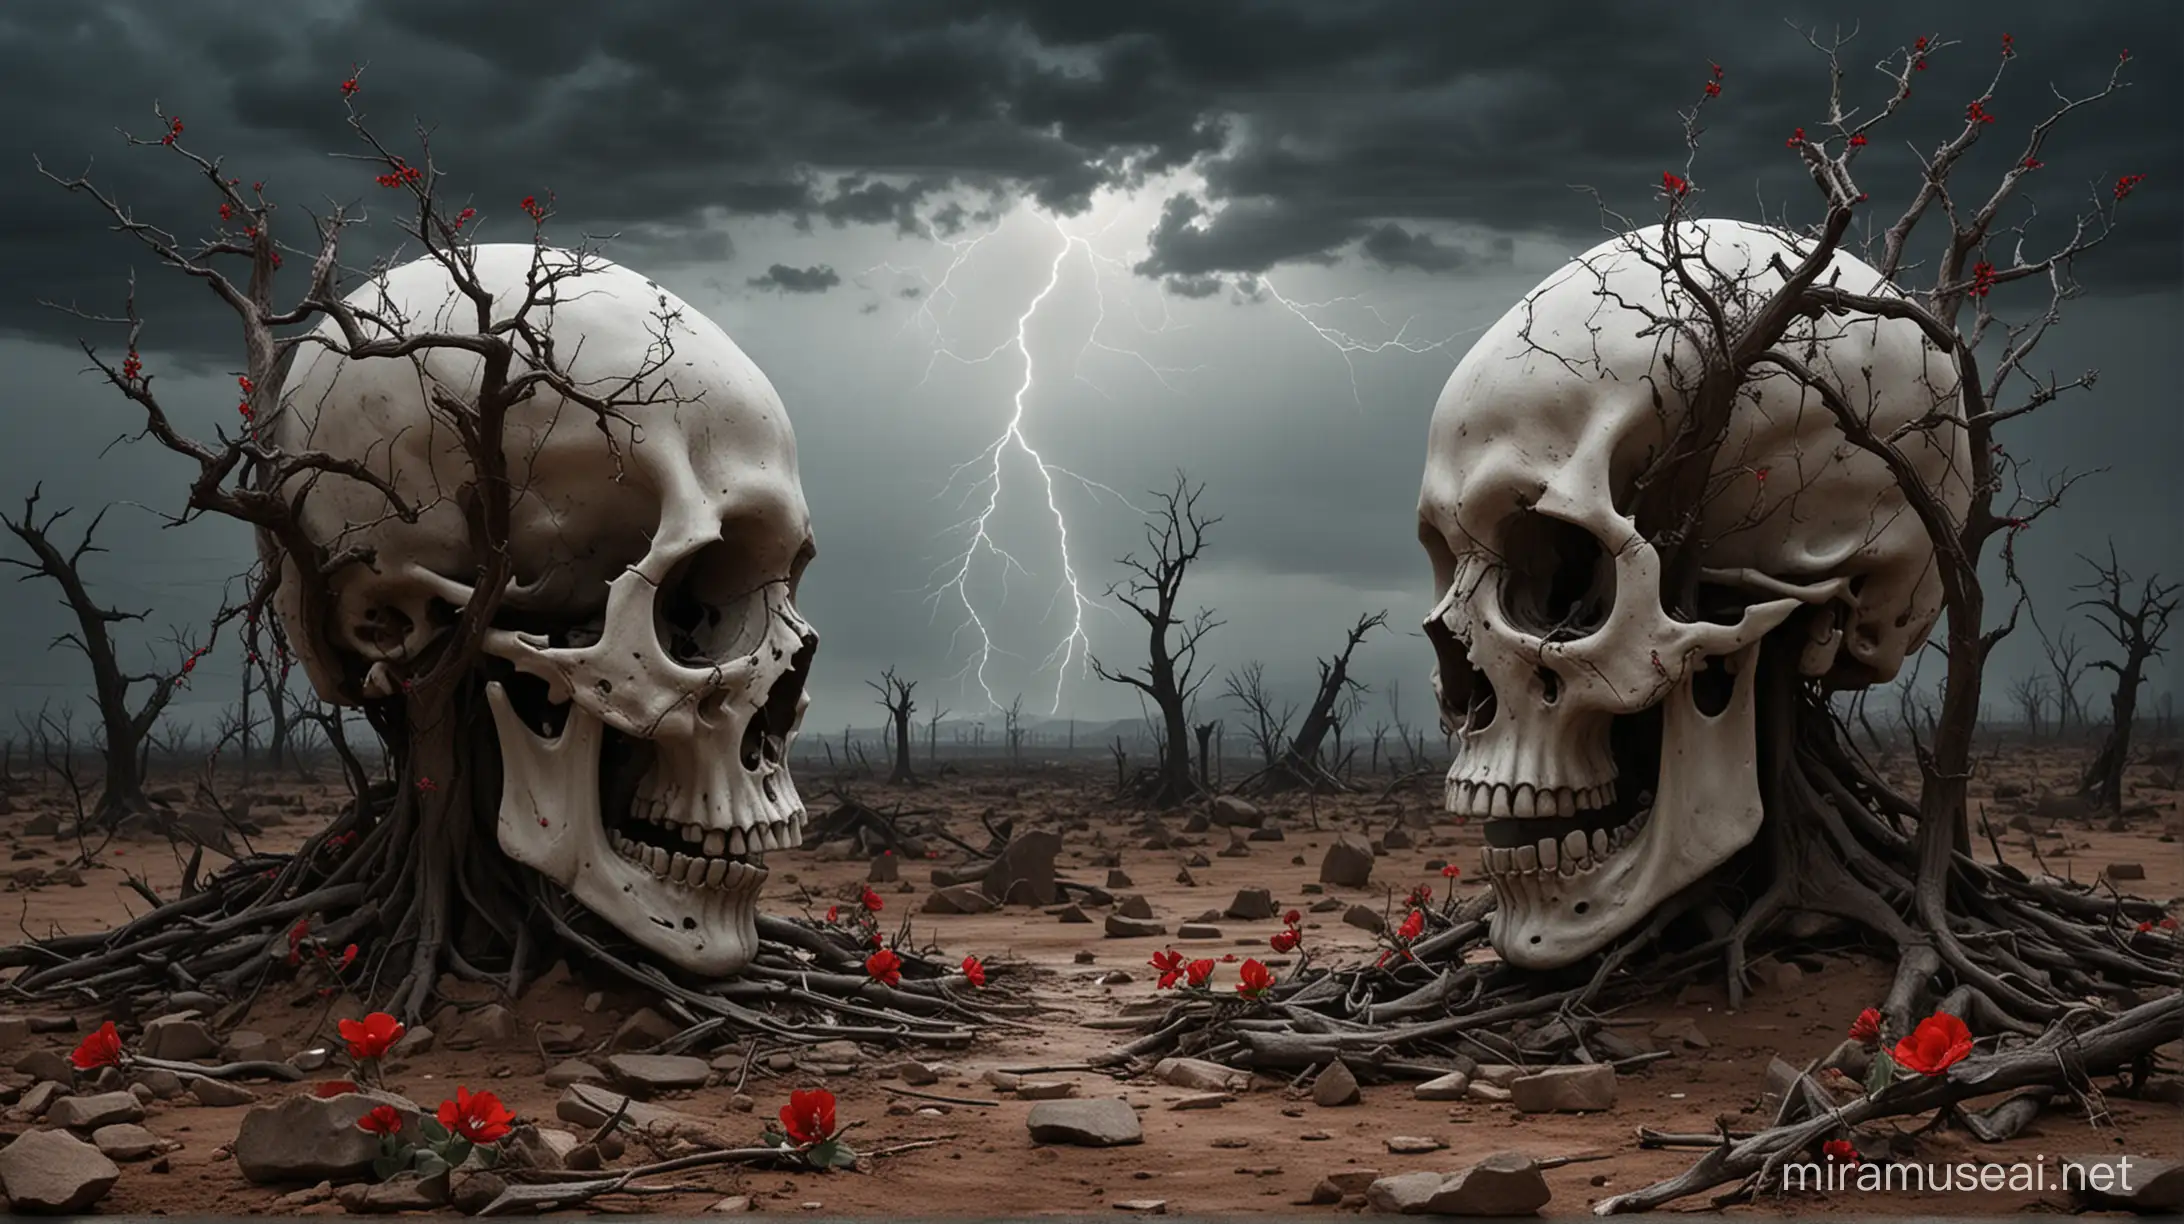 Apocalyptic Landscape Gaunt Trees Skulls and BloodRed Hope